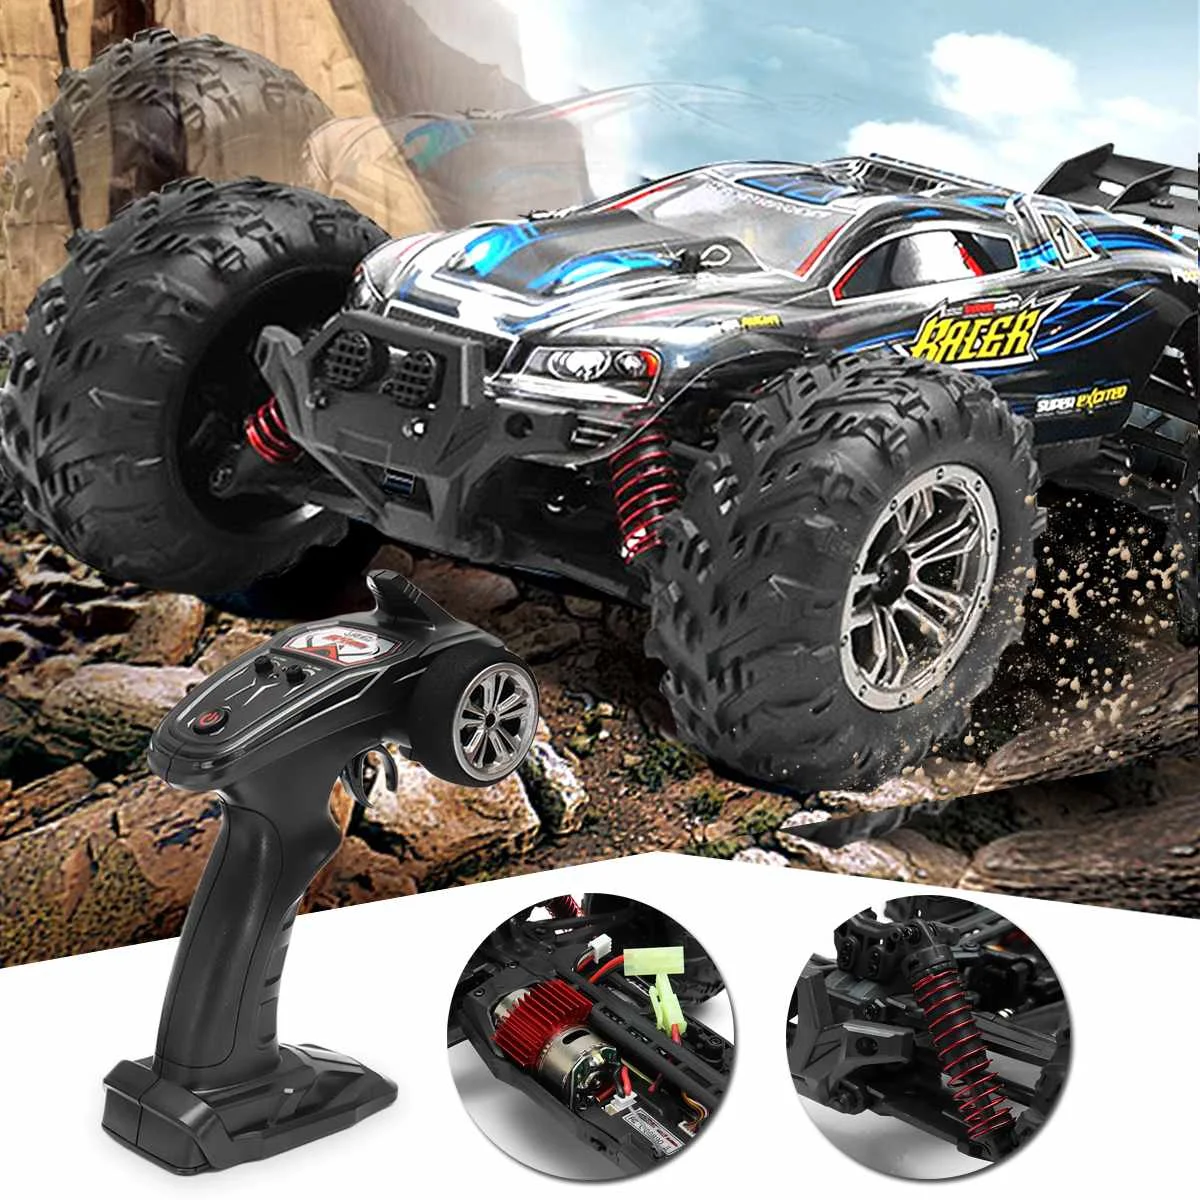 

Xinlehong 9136 1/16 2.4G 4WD 32cm Rc Car 36km/h Bigfoot Off-road Truck RTR Toy Racing Machine Gift Toy Remote Control Vehicle